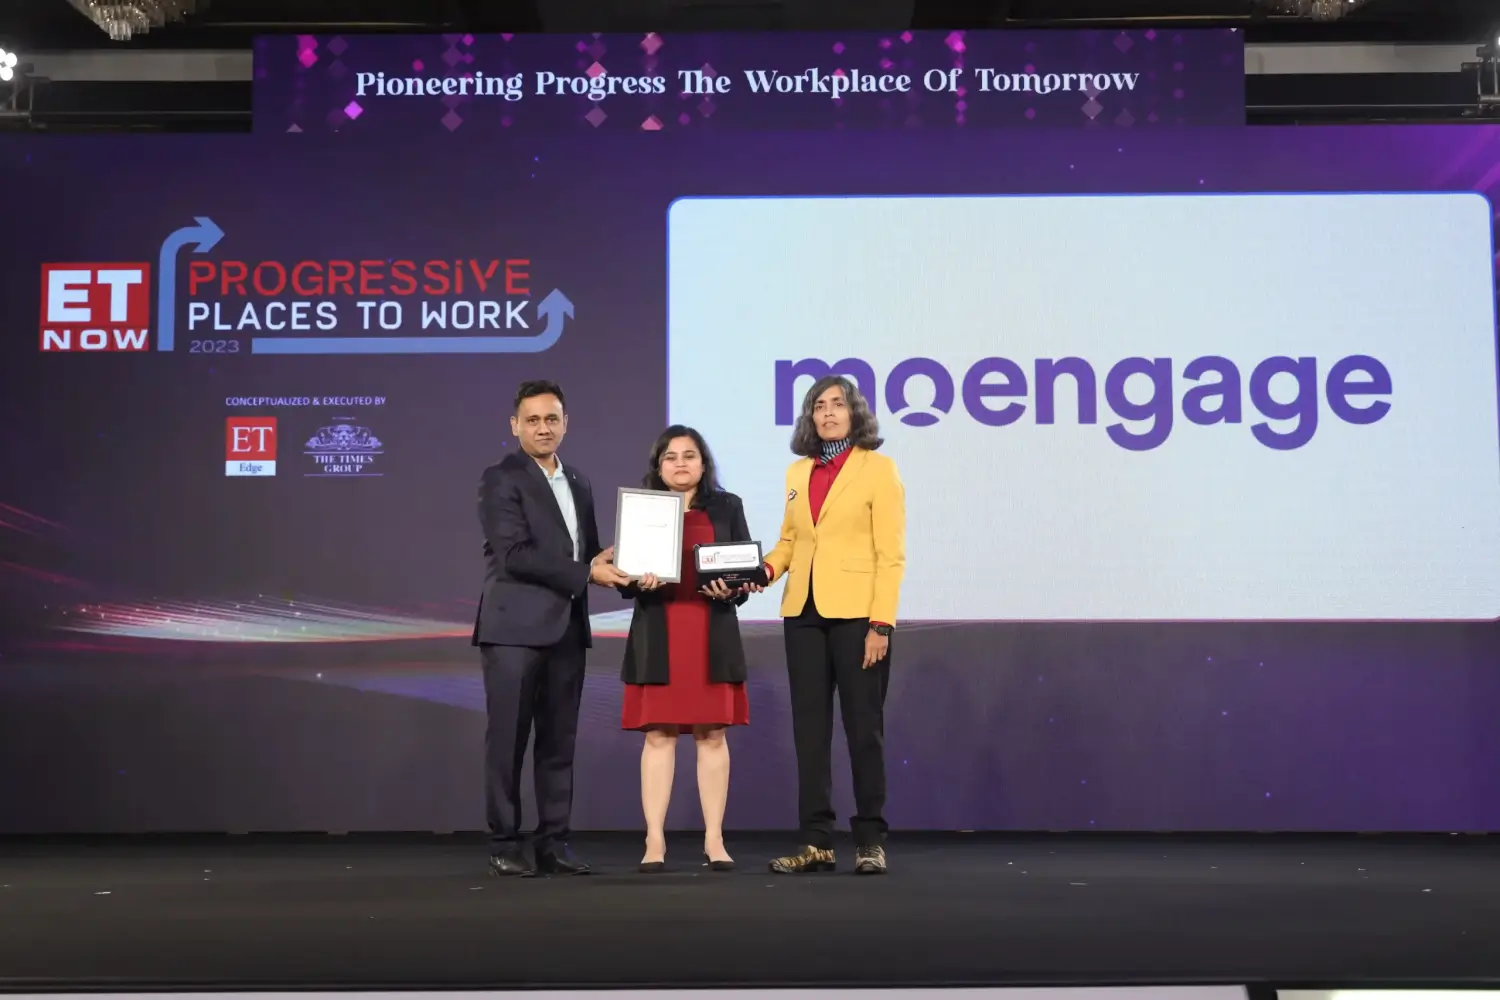 Sumana Ananth, the Associate Director of People & Culture receives the Progressive Place to Work recognition on behalf of MoEngage